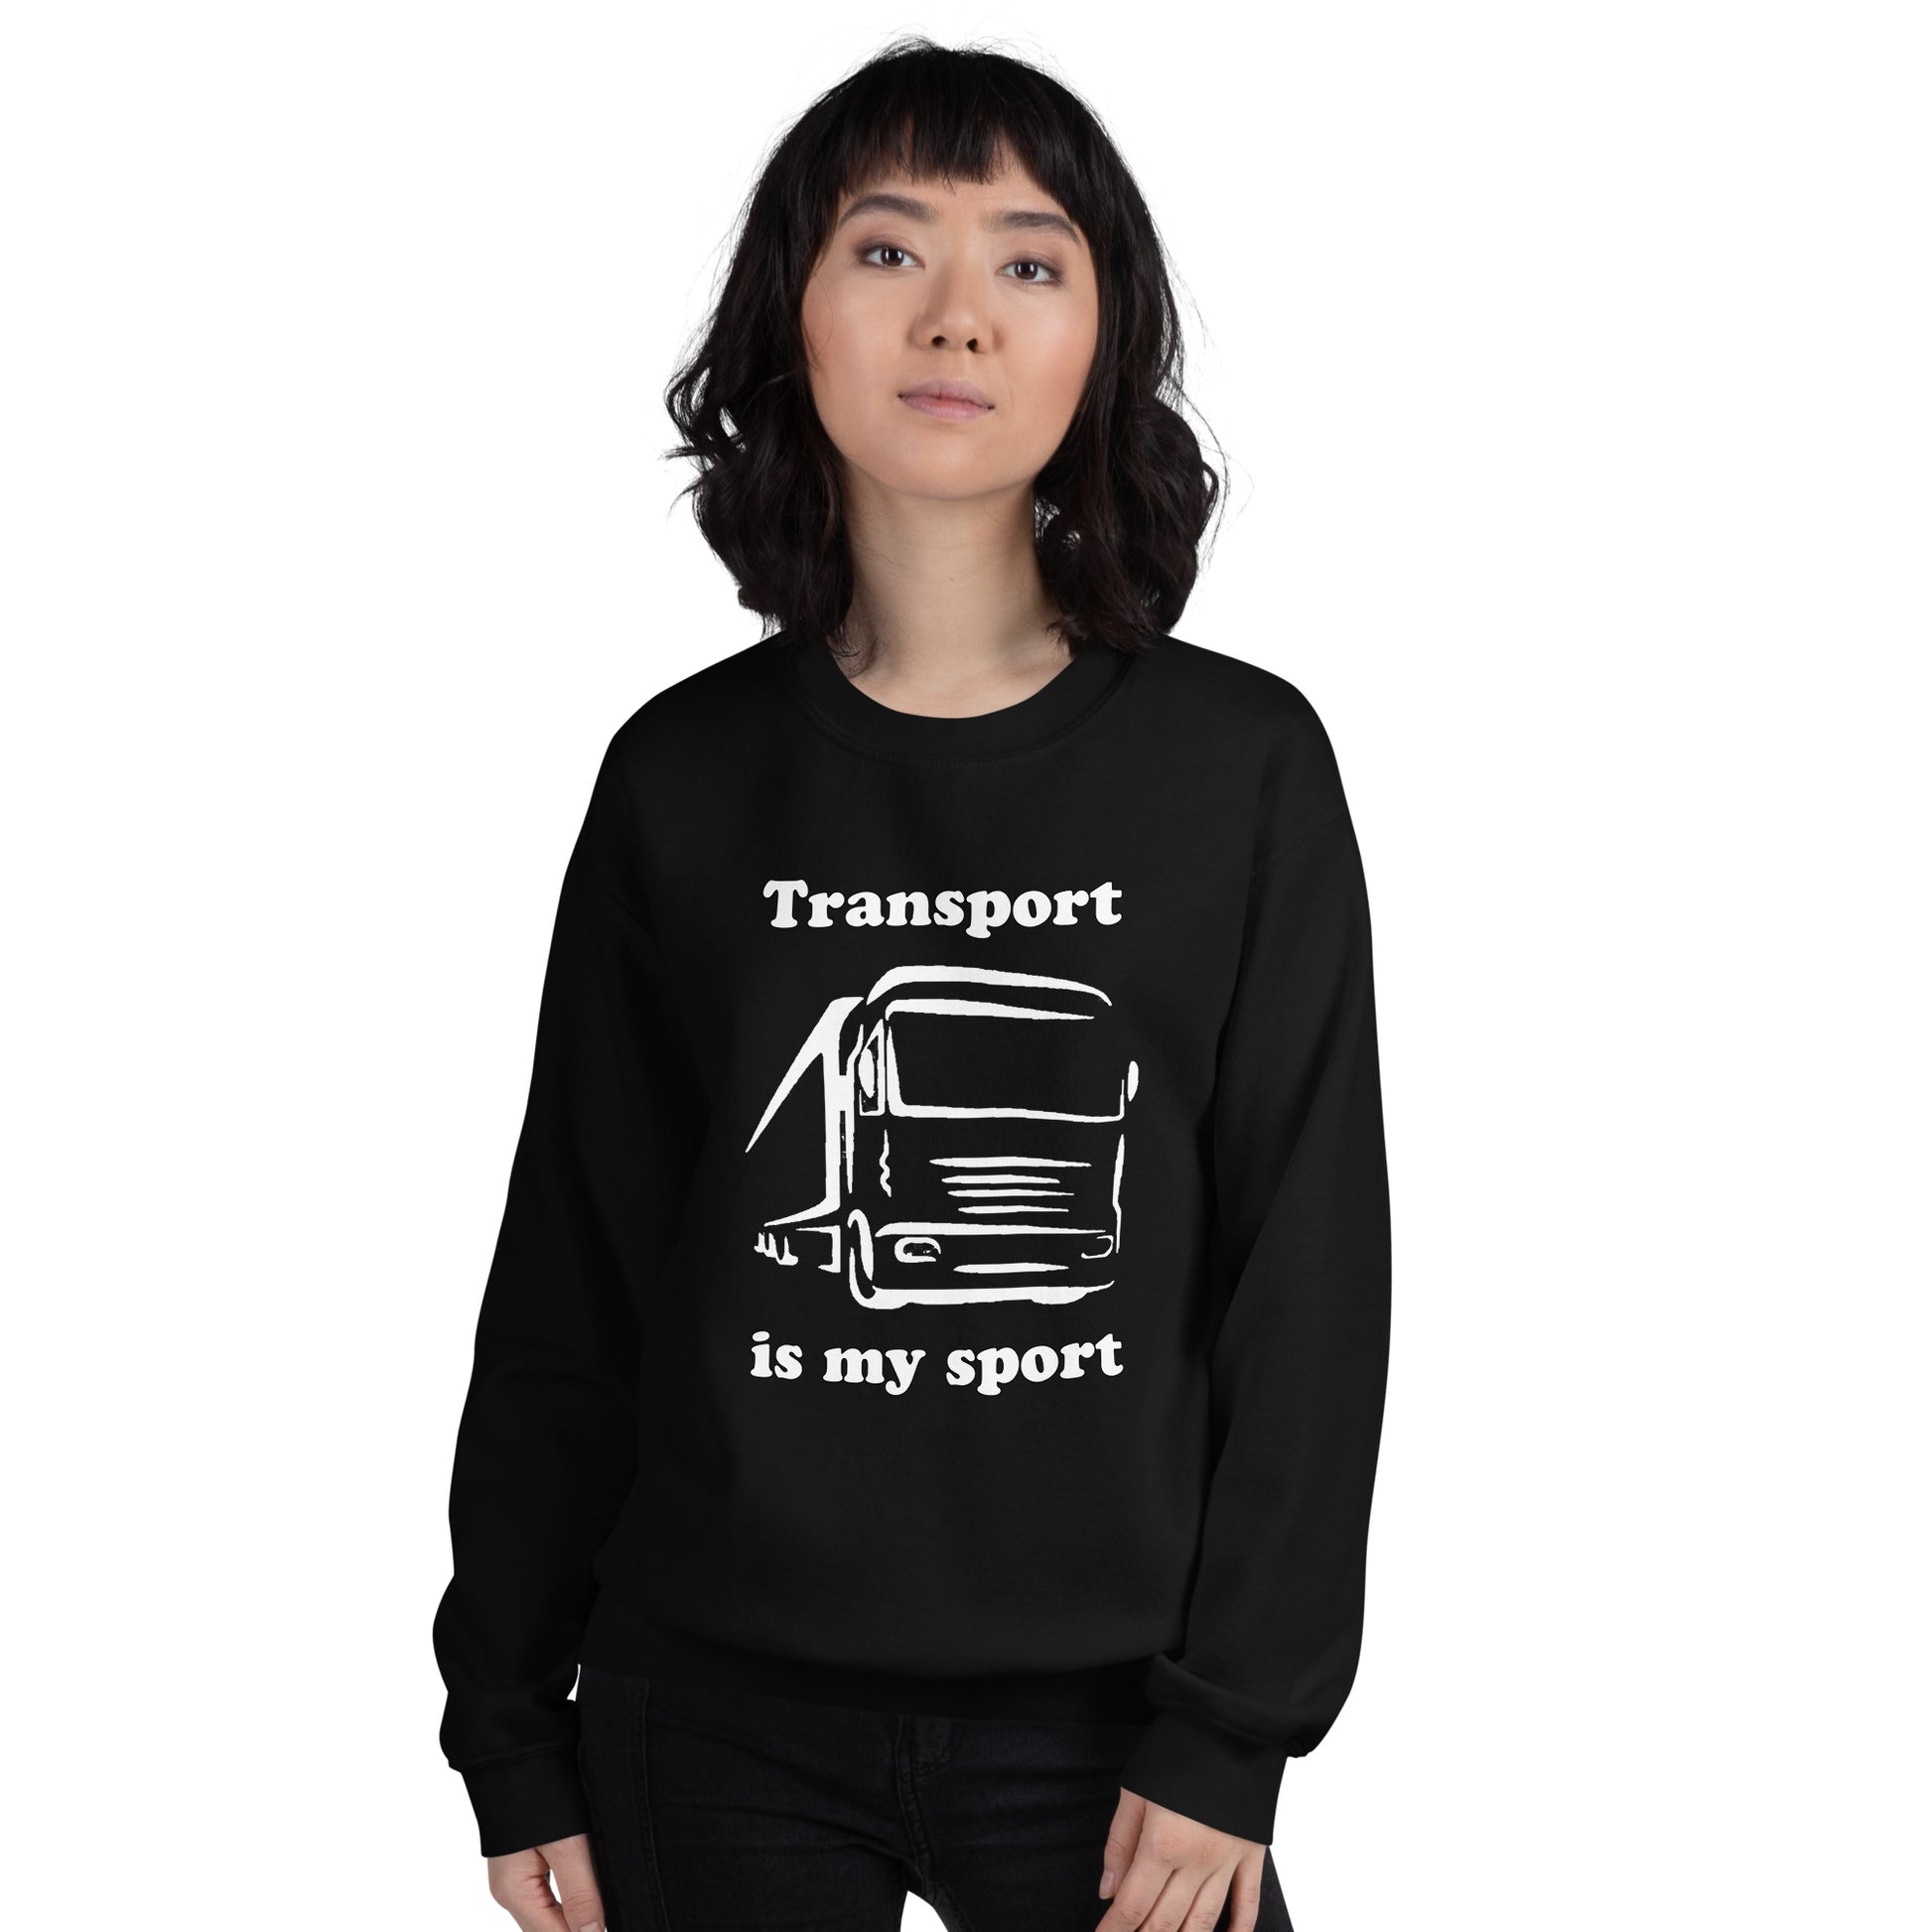 Woman with black sweatshirt with picture of truck and text "Transport is my sport"